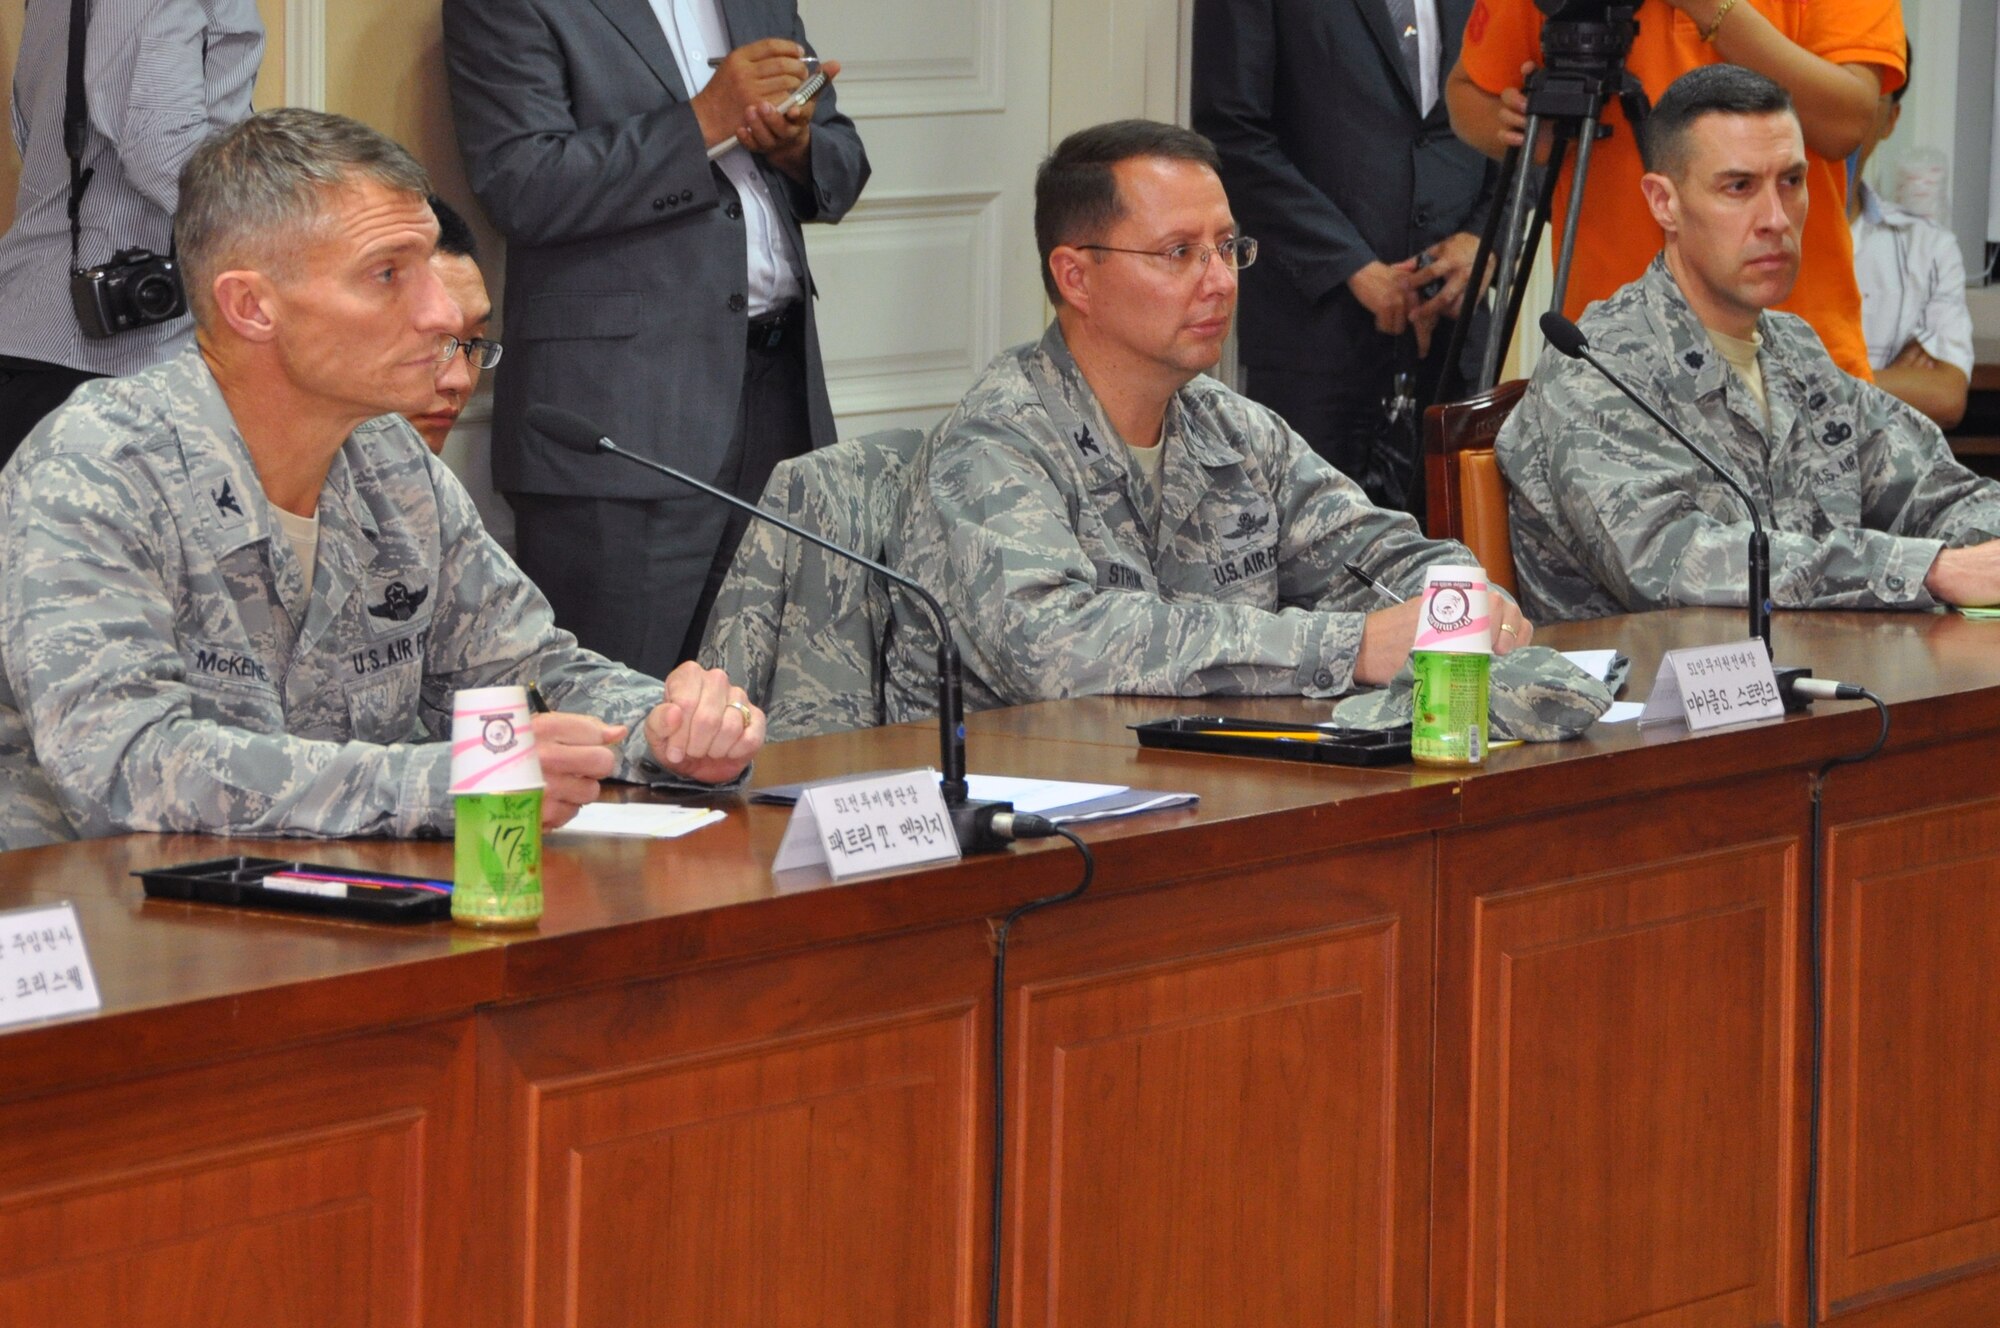 (From left to right) Col. Patrick McKenzie, 51st Fighter Wing commander, Col. Michael Strunk, 51st Mission Support Group commander, and Lt. Col. Jason Beck, 51st Security Forces commander, attend a meeting with city officials in Pyeongtaek, Republic of Korea, July 10, 2012. The commanders and city officials discussed joint town patrols, Korean Nation Police assistance with parking restrictions, the off-limits establishments to U.S. Forces Korea personnel and expanding the Osan and Songtan Community Advisory Council. (U.S. Air Force photo/Capt. Cody Chiles)